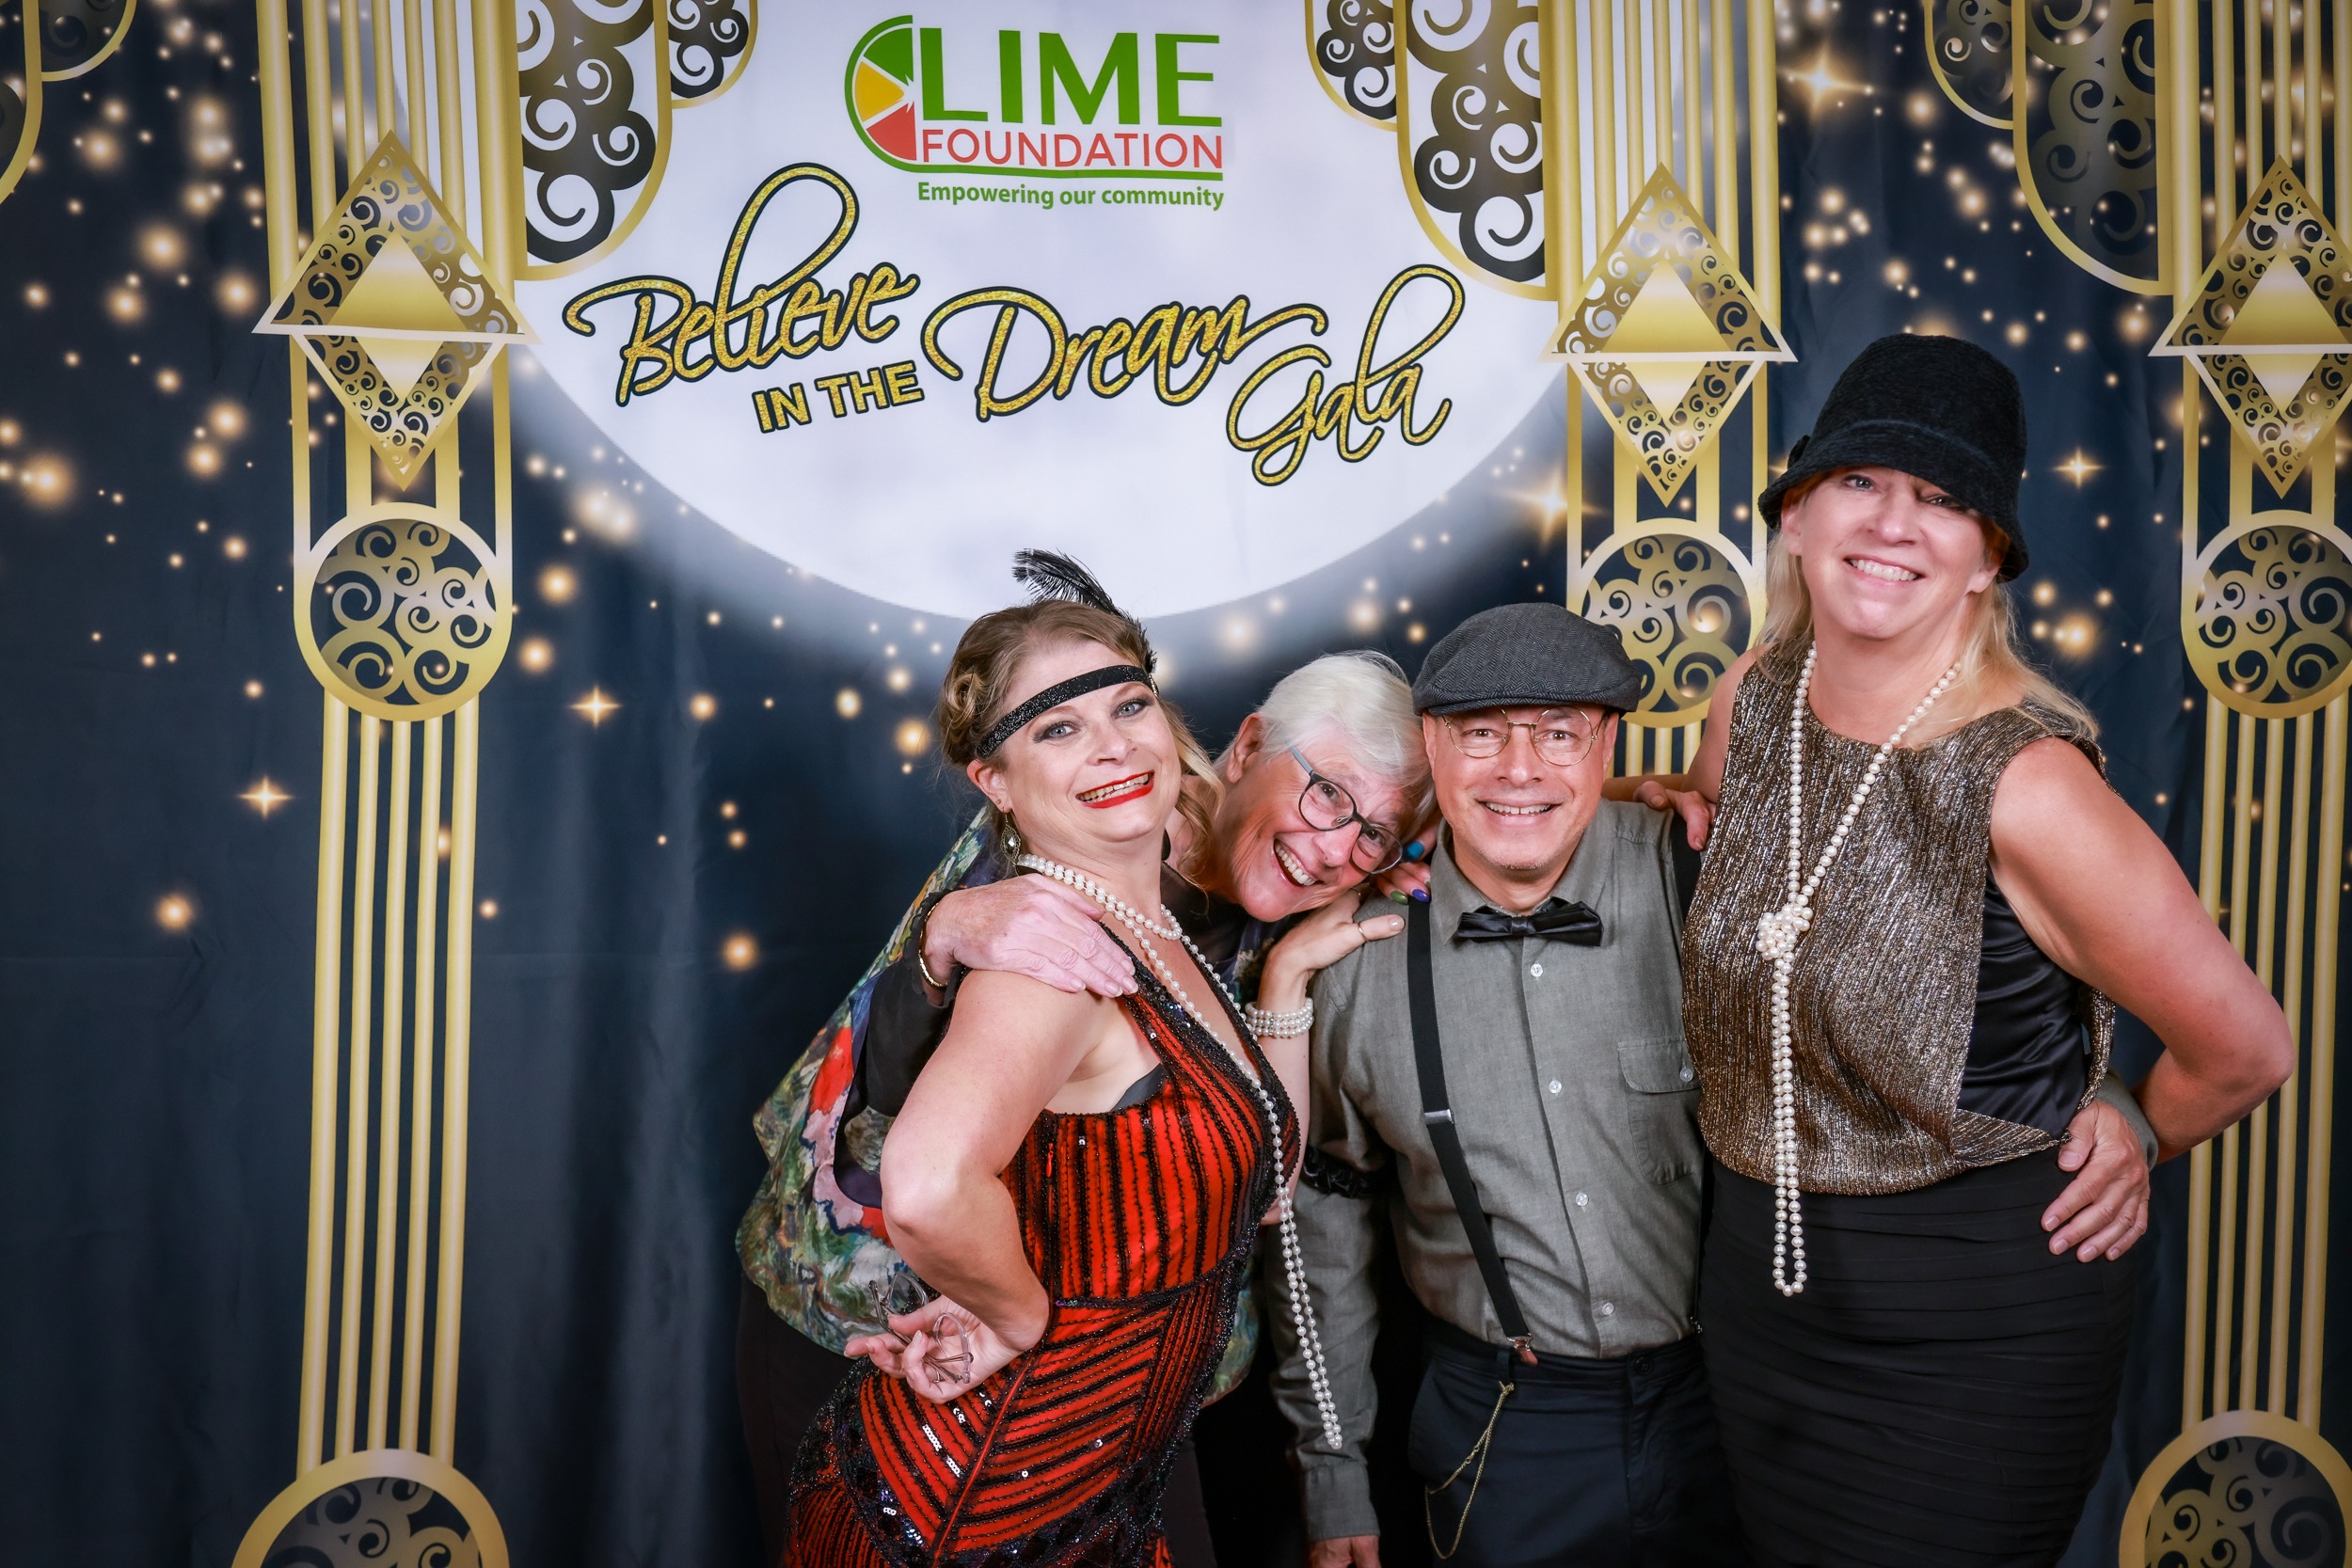 A group of people posing for a photo at a 1920s themed party hosted by the LIME Foundation.